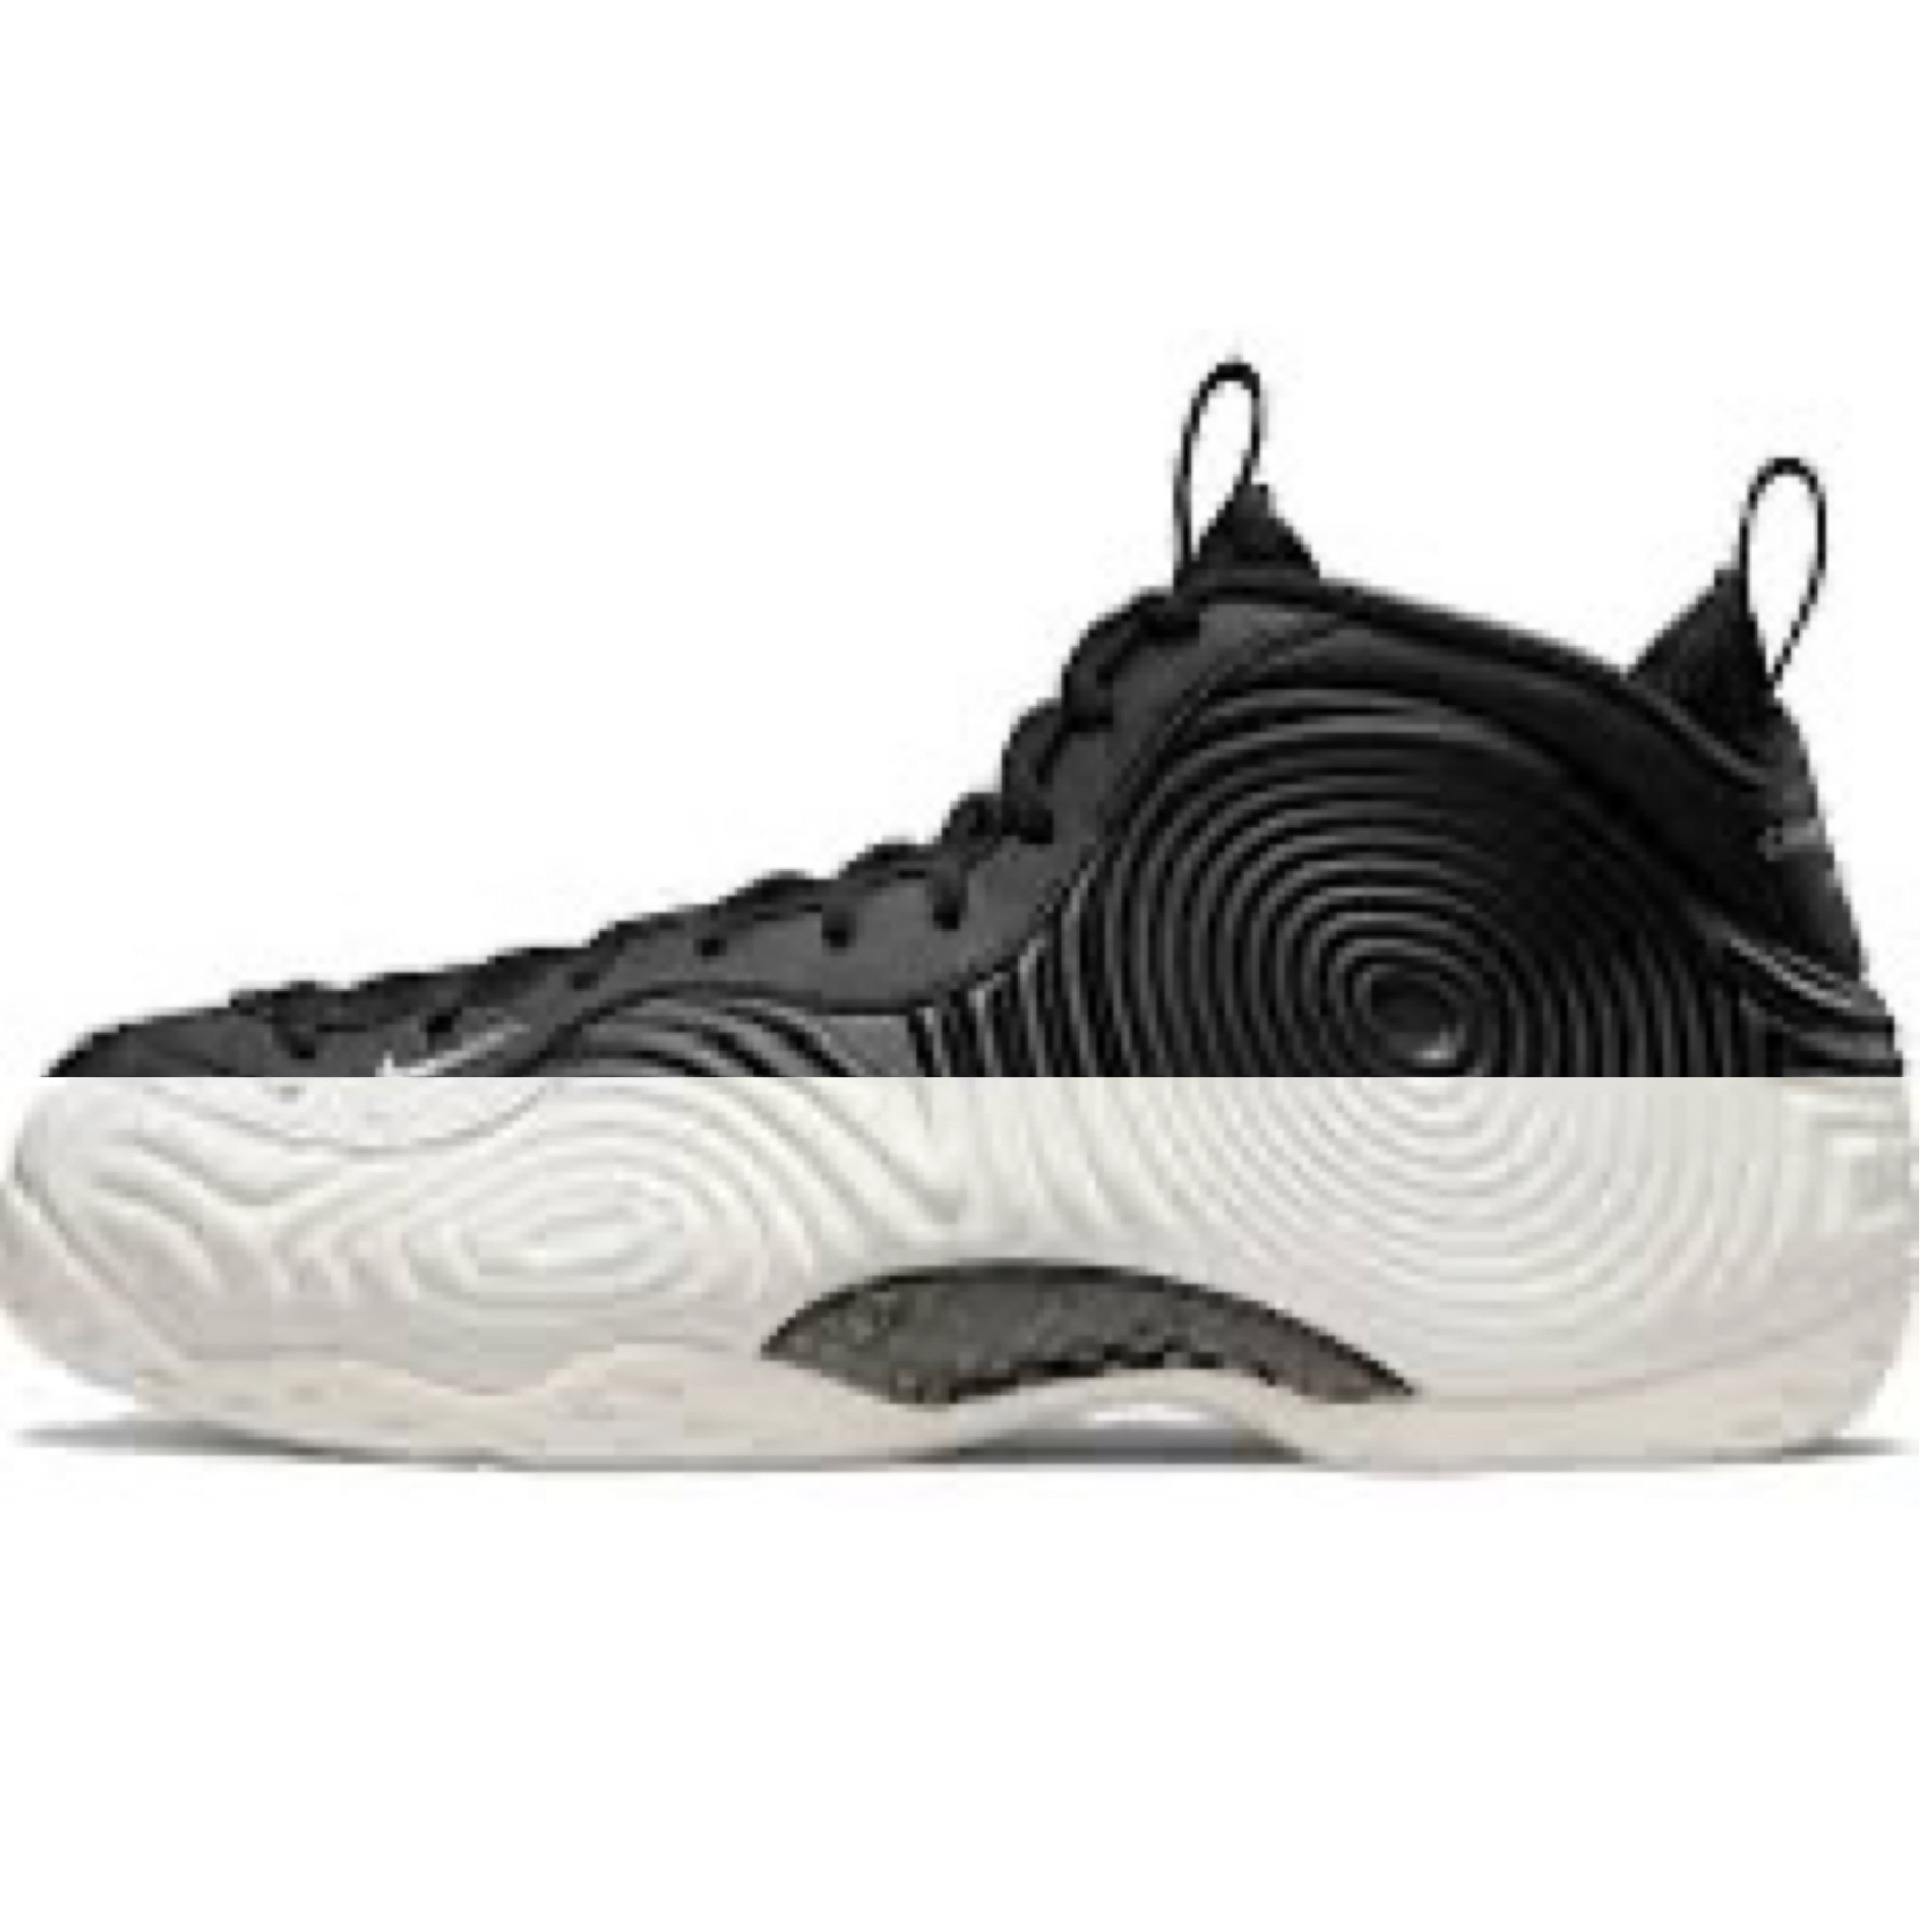 COMME des GARCONS HOMME PLUS x NIKE AIR FOAMPOSITE ONE 新色BLACK/WHITE 2024年夏価格を下げて再販か